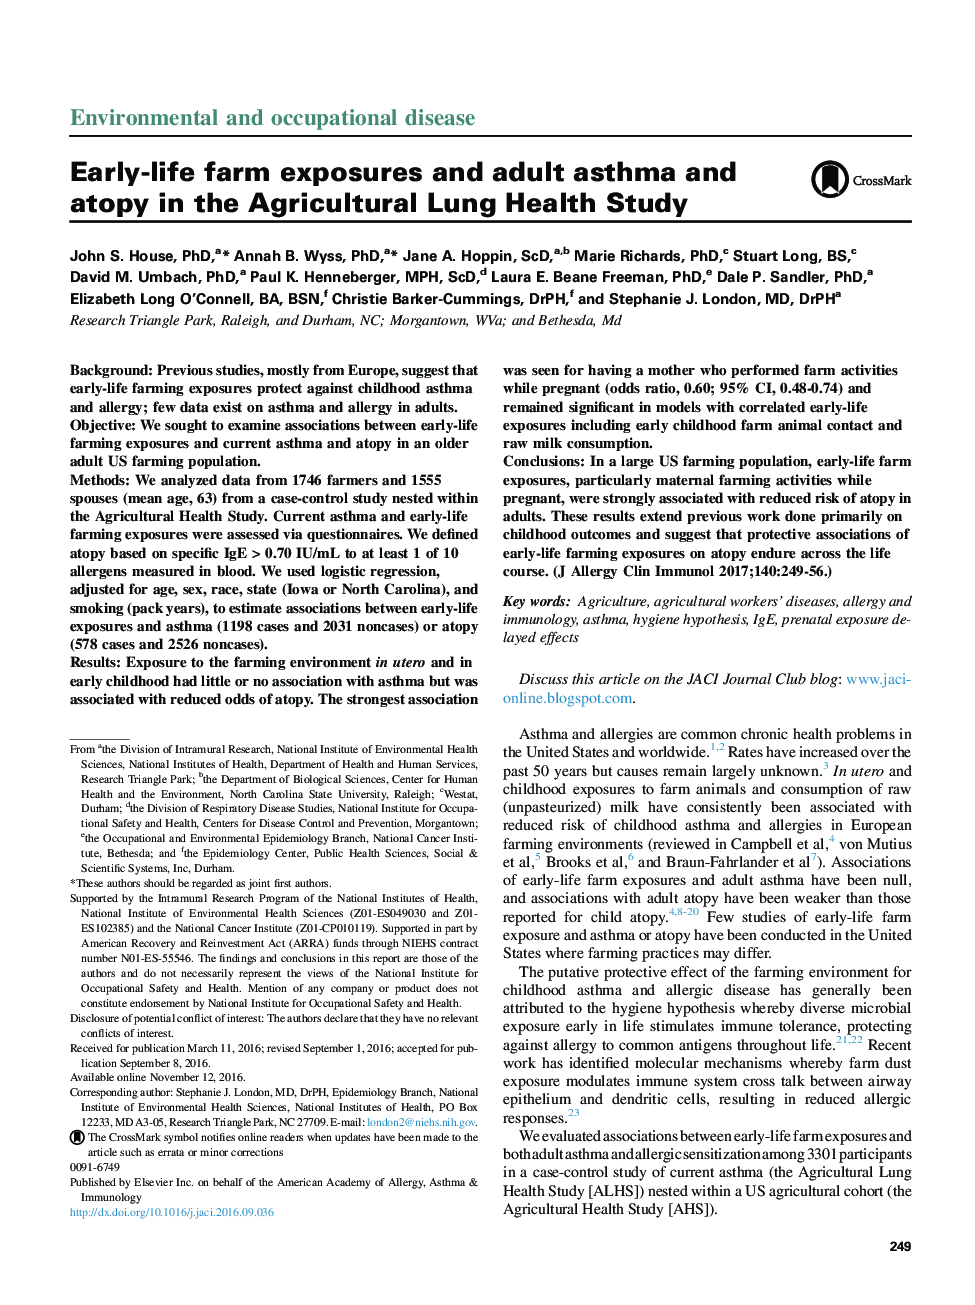 Early-life farm exposures and adult asthma and atopy in the Agricultural Lung Health Study